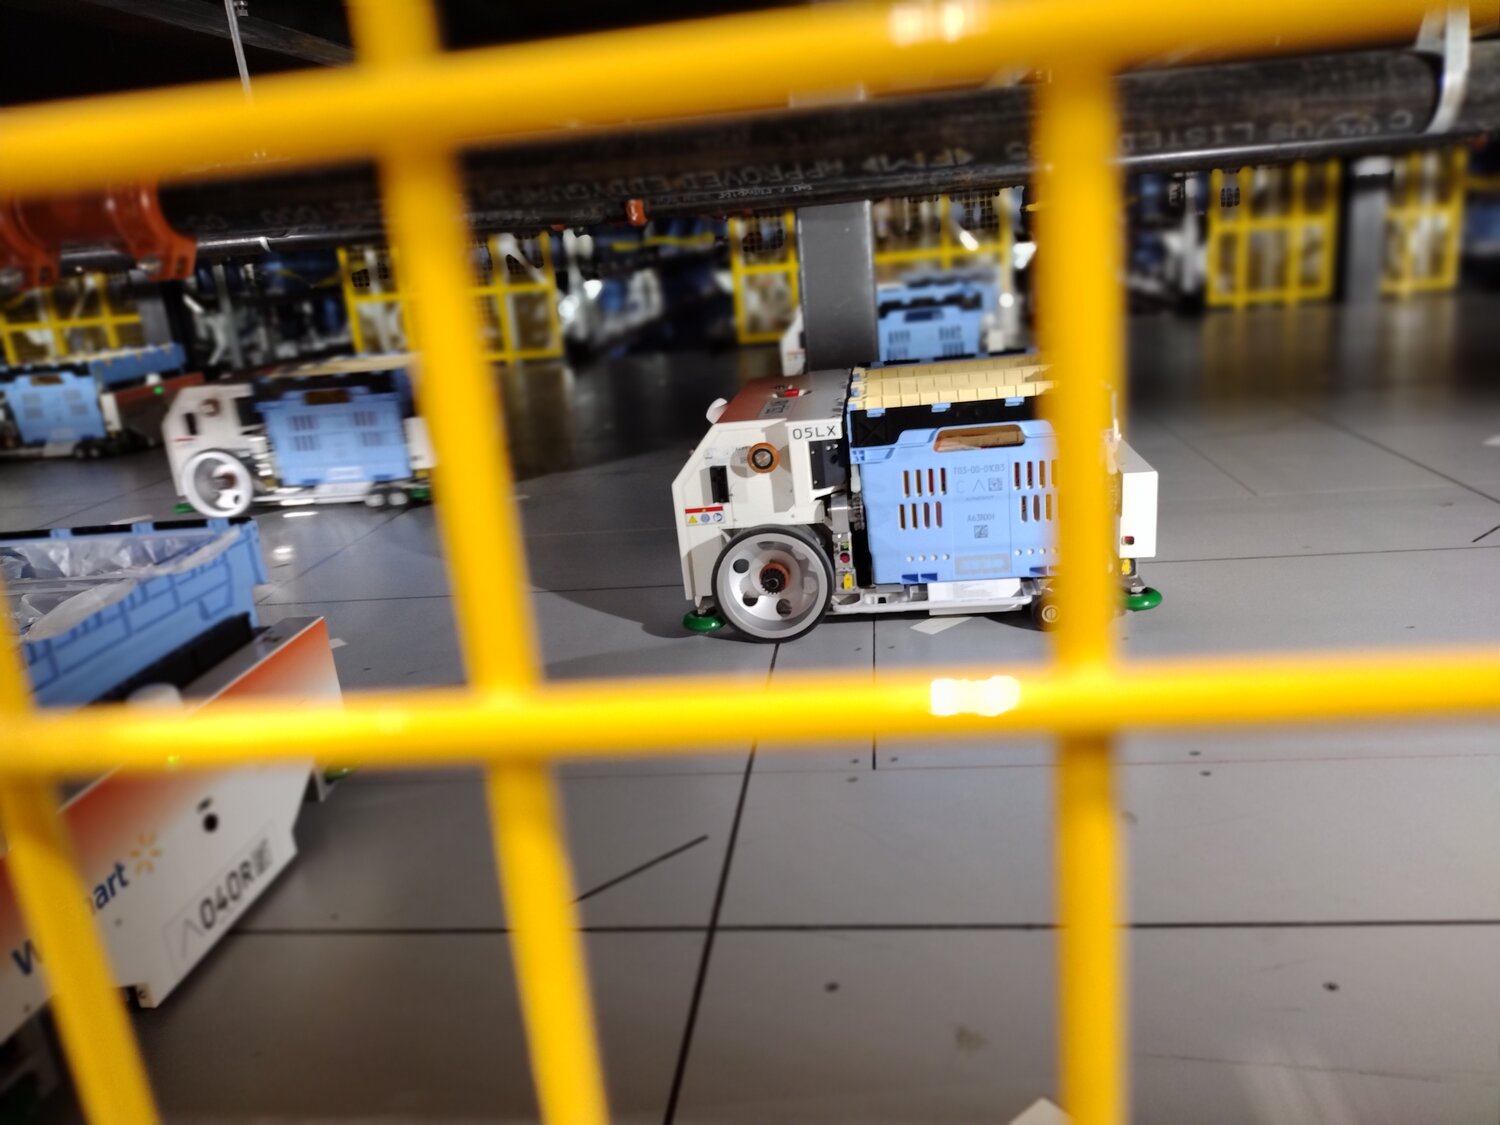 Robots scurry back and forth carrying products to and from storage at Walmart’s Fulfillment Center in Katy. The machines also retrieve items from the storage areas to fulfill customer orders for pick-up.